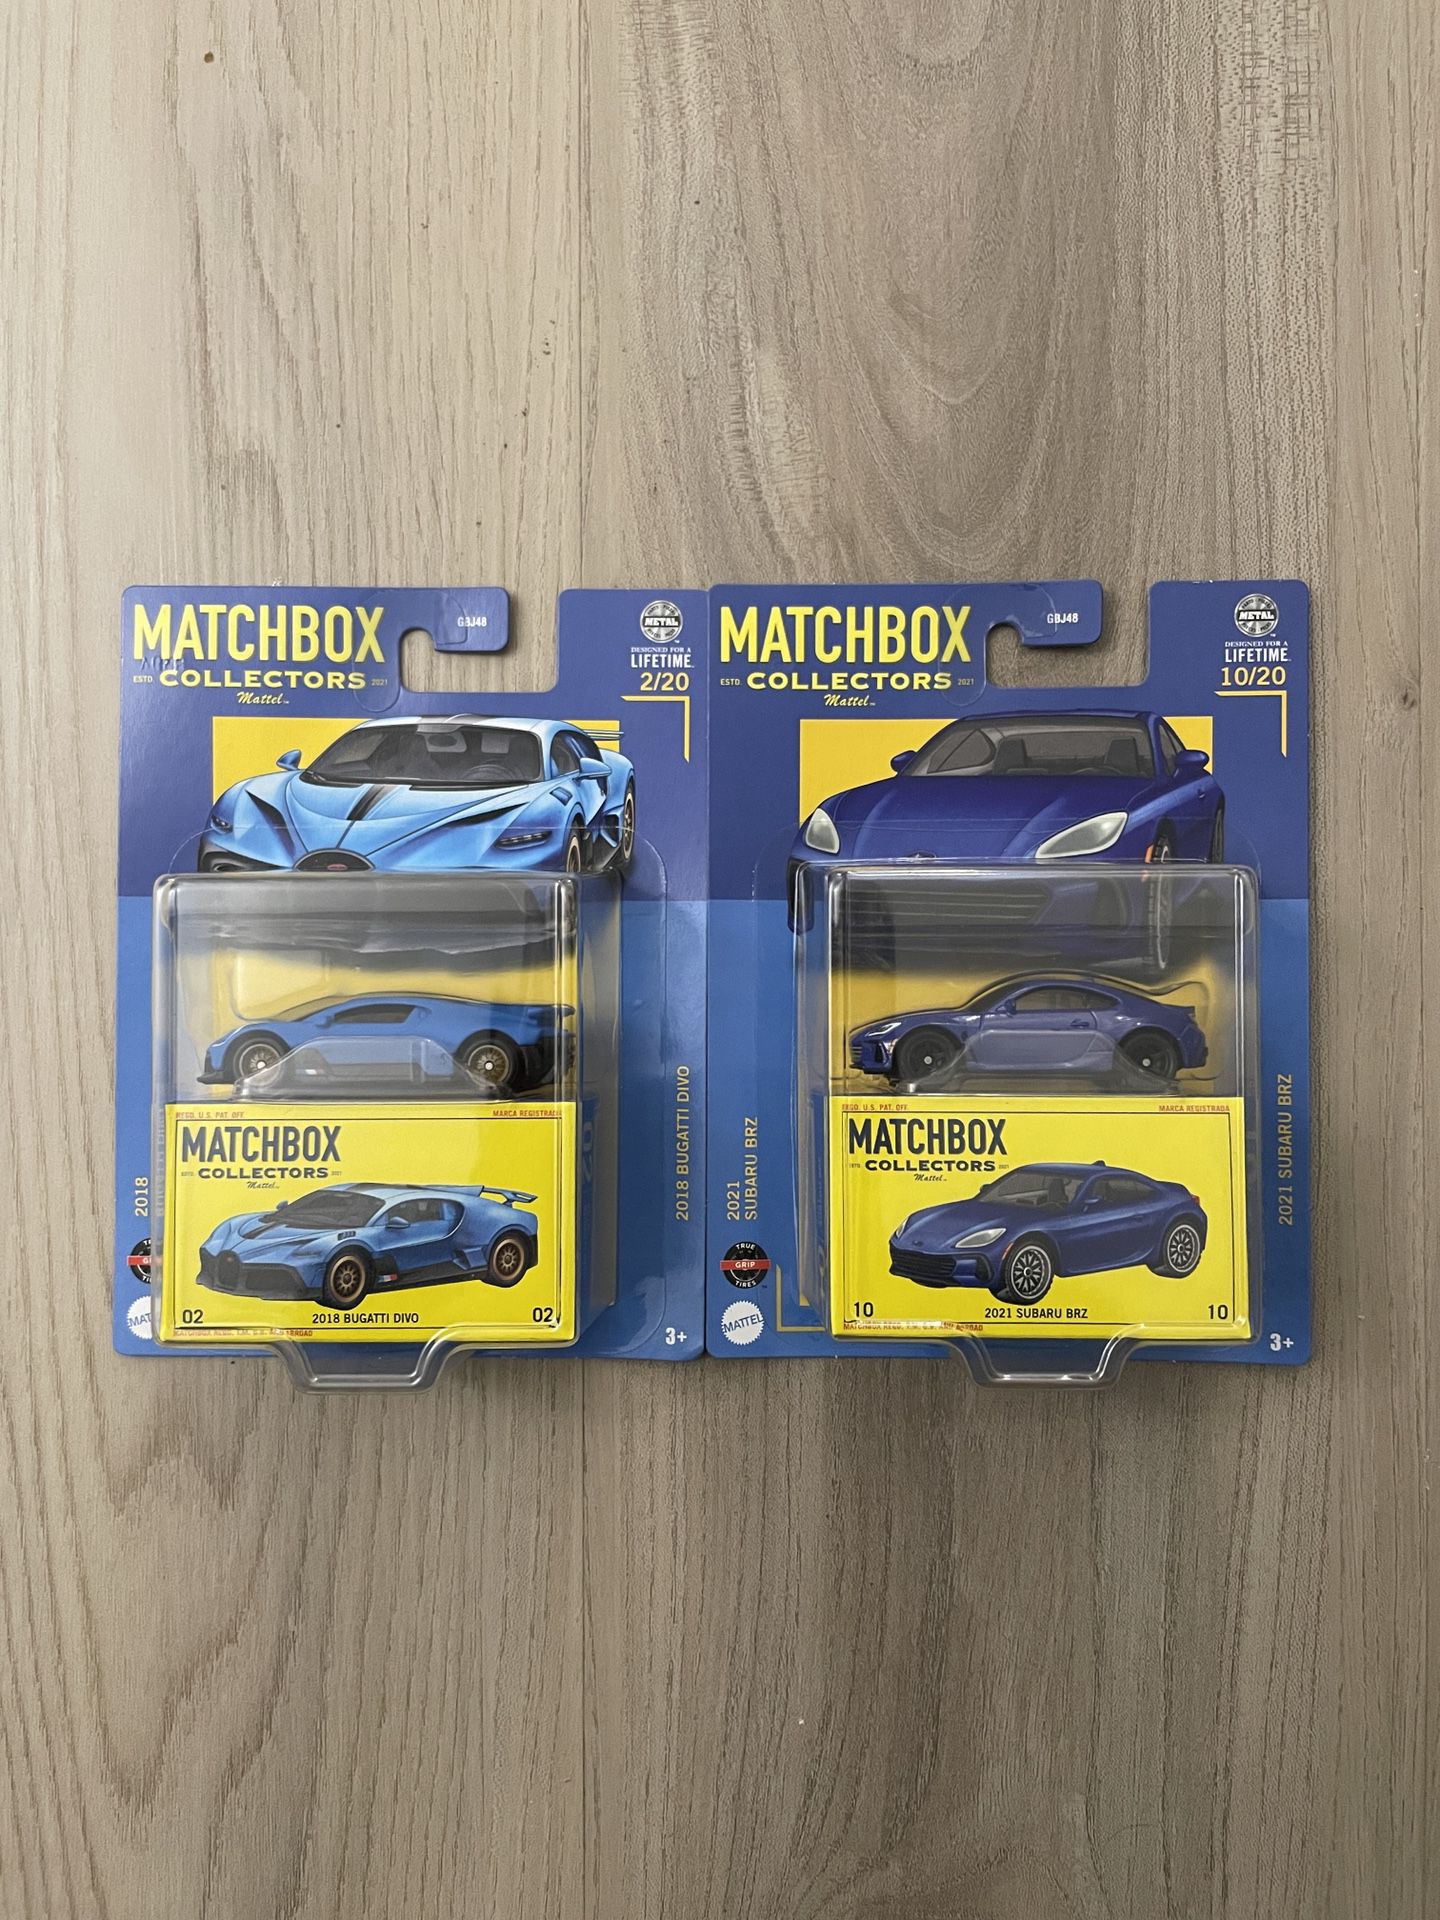 Matchbox Collectors - Buy Or Trade